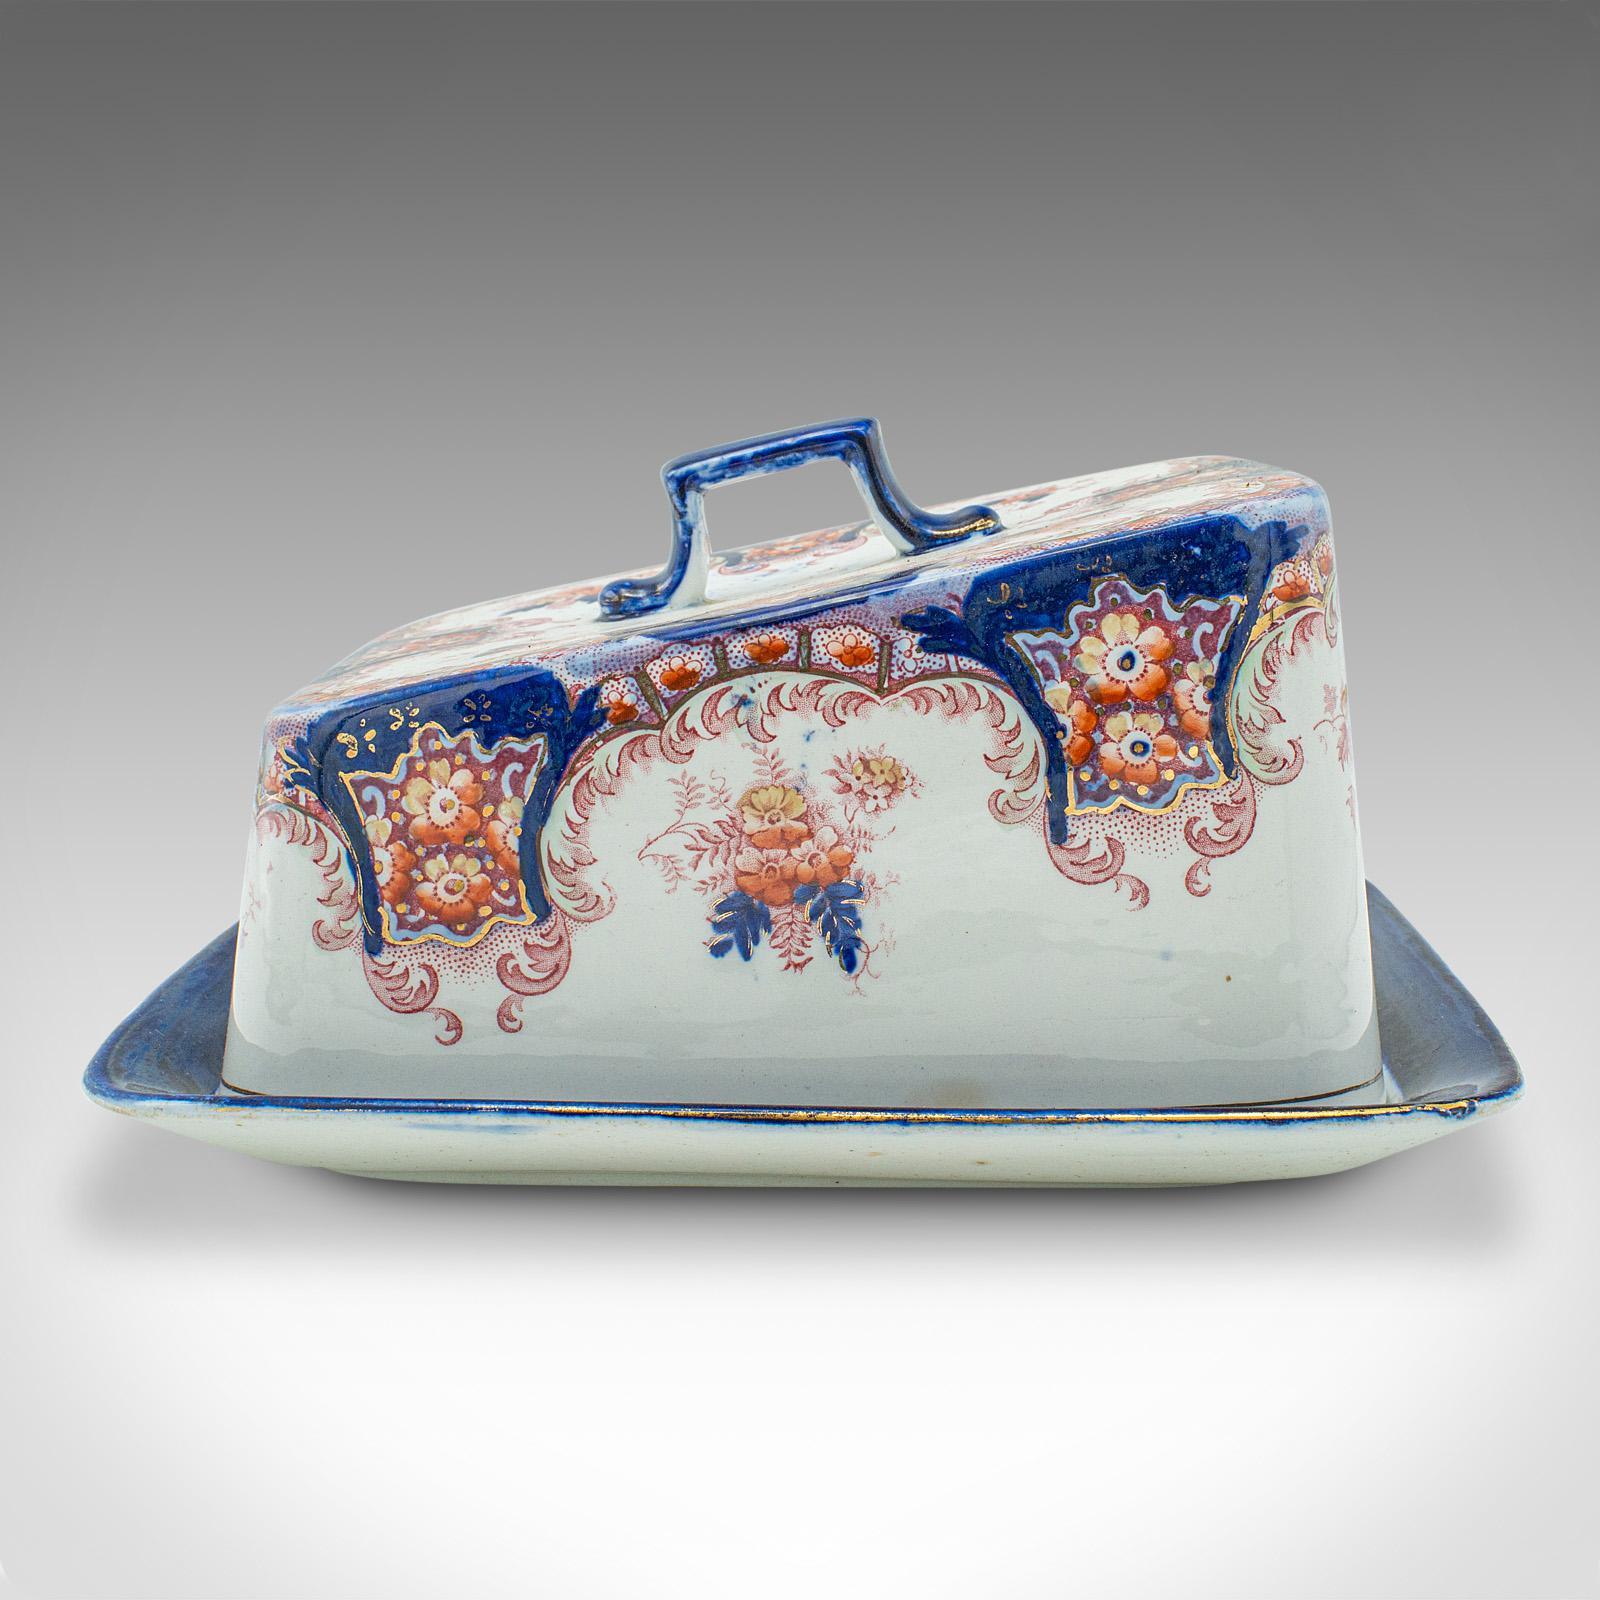 British Antique Cheese Keeper Dish, English, Ceramic, Butter Tray, Kitchen, Victorian For Sale